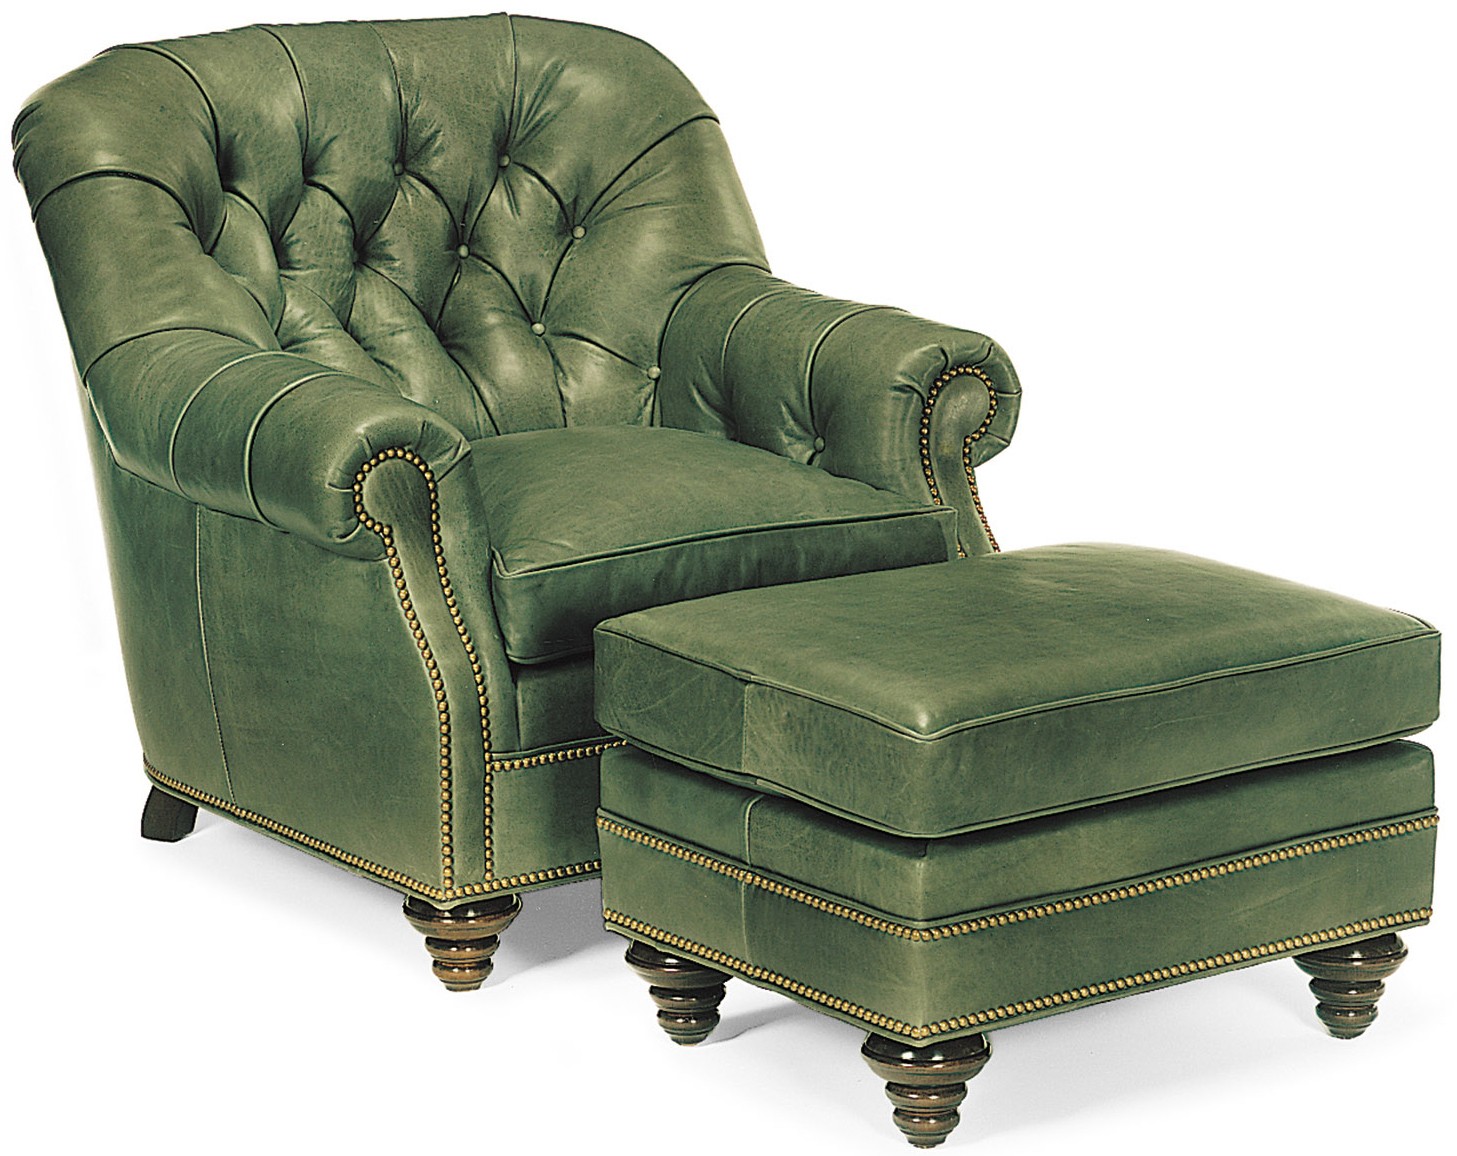 CHAIRS, Leather, Upholstered, Accent Green leather tufted armchair and ottoman